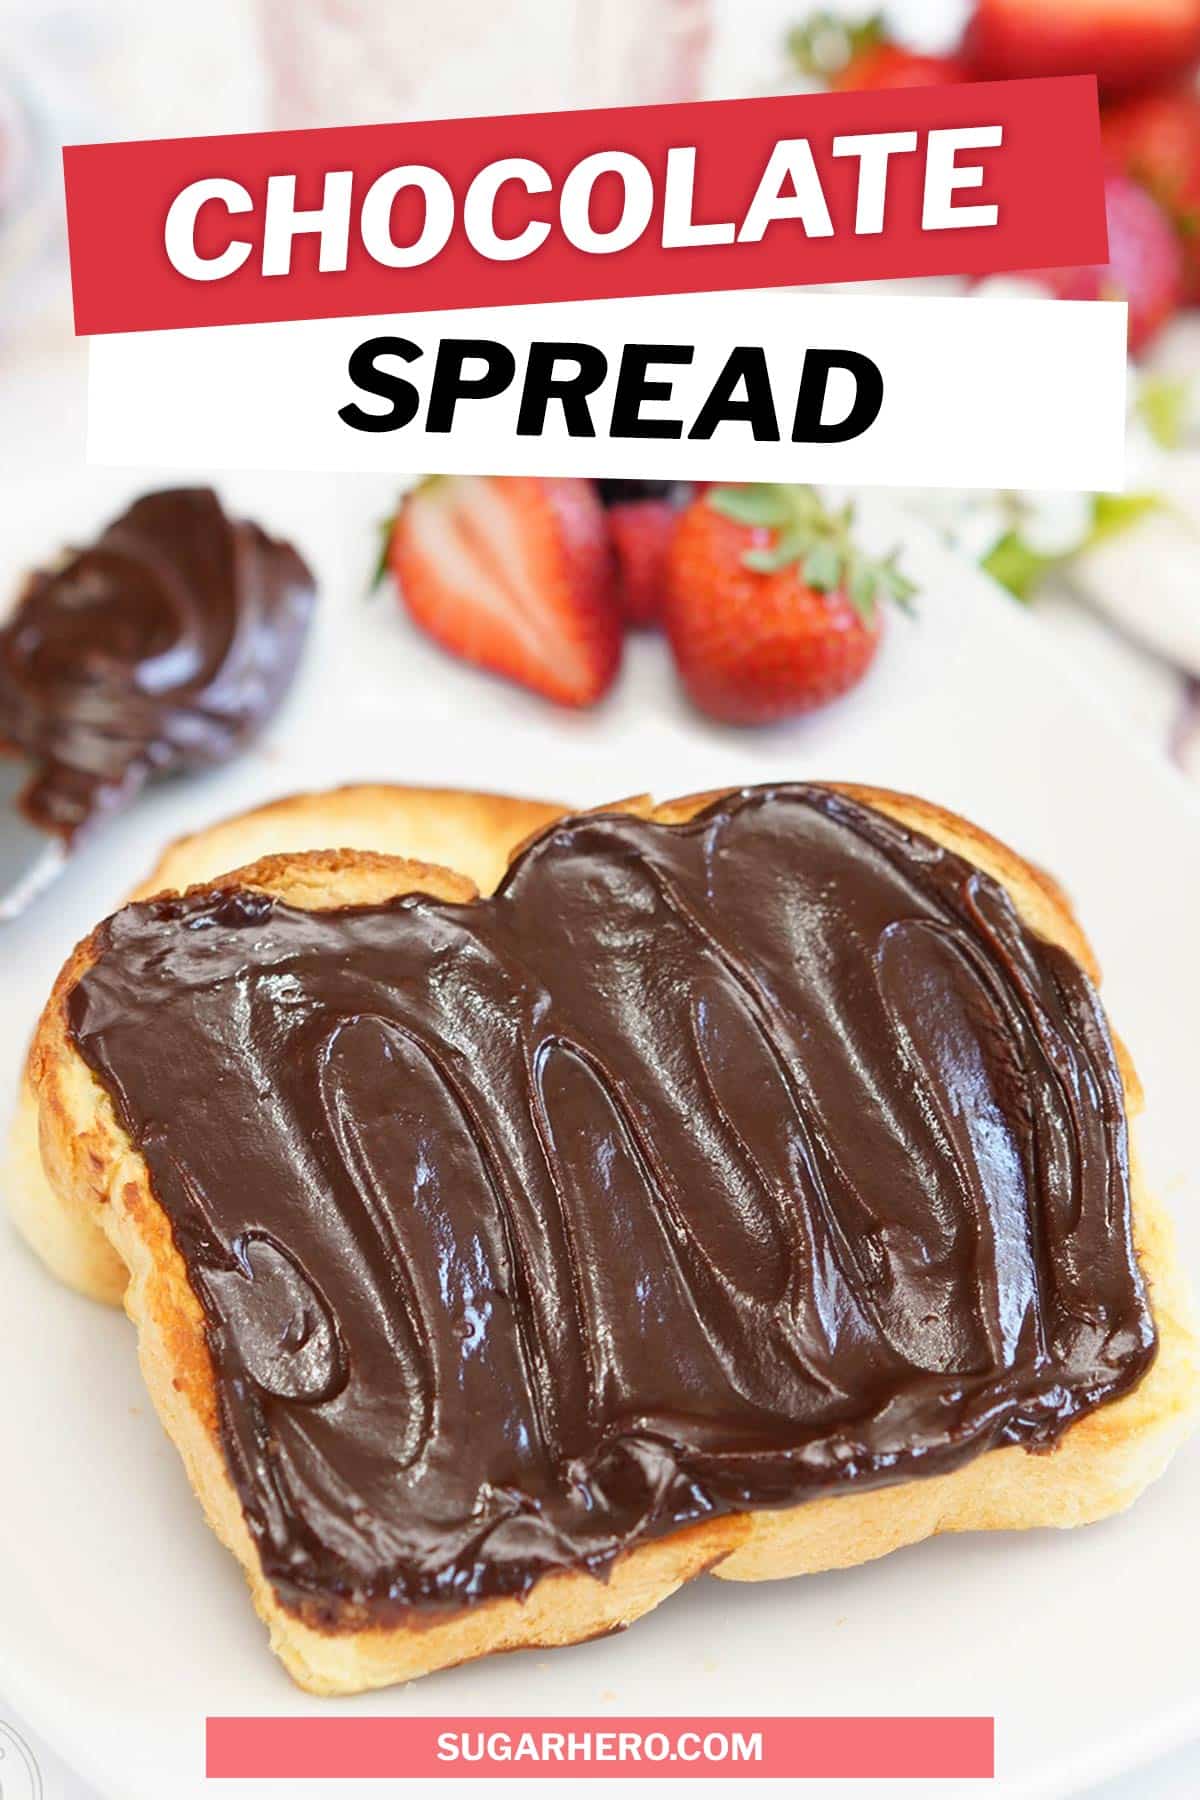 Photo of chocolate spread with text overlay for Pinterest.